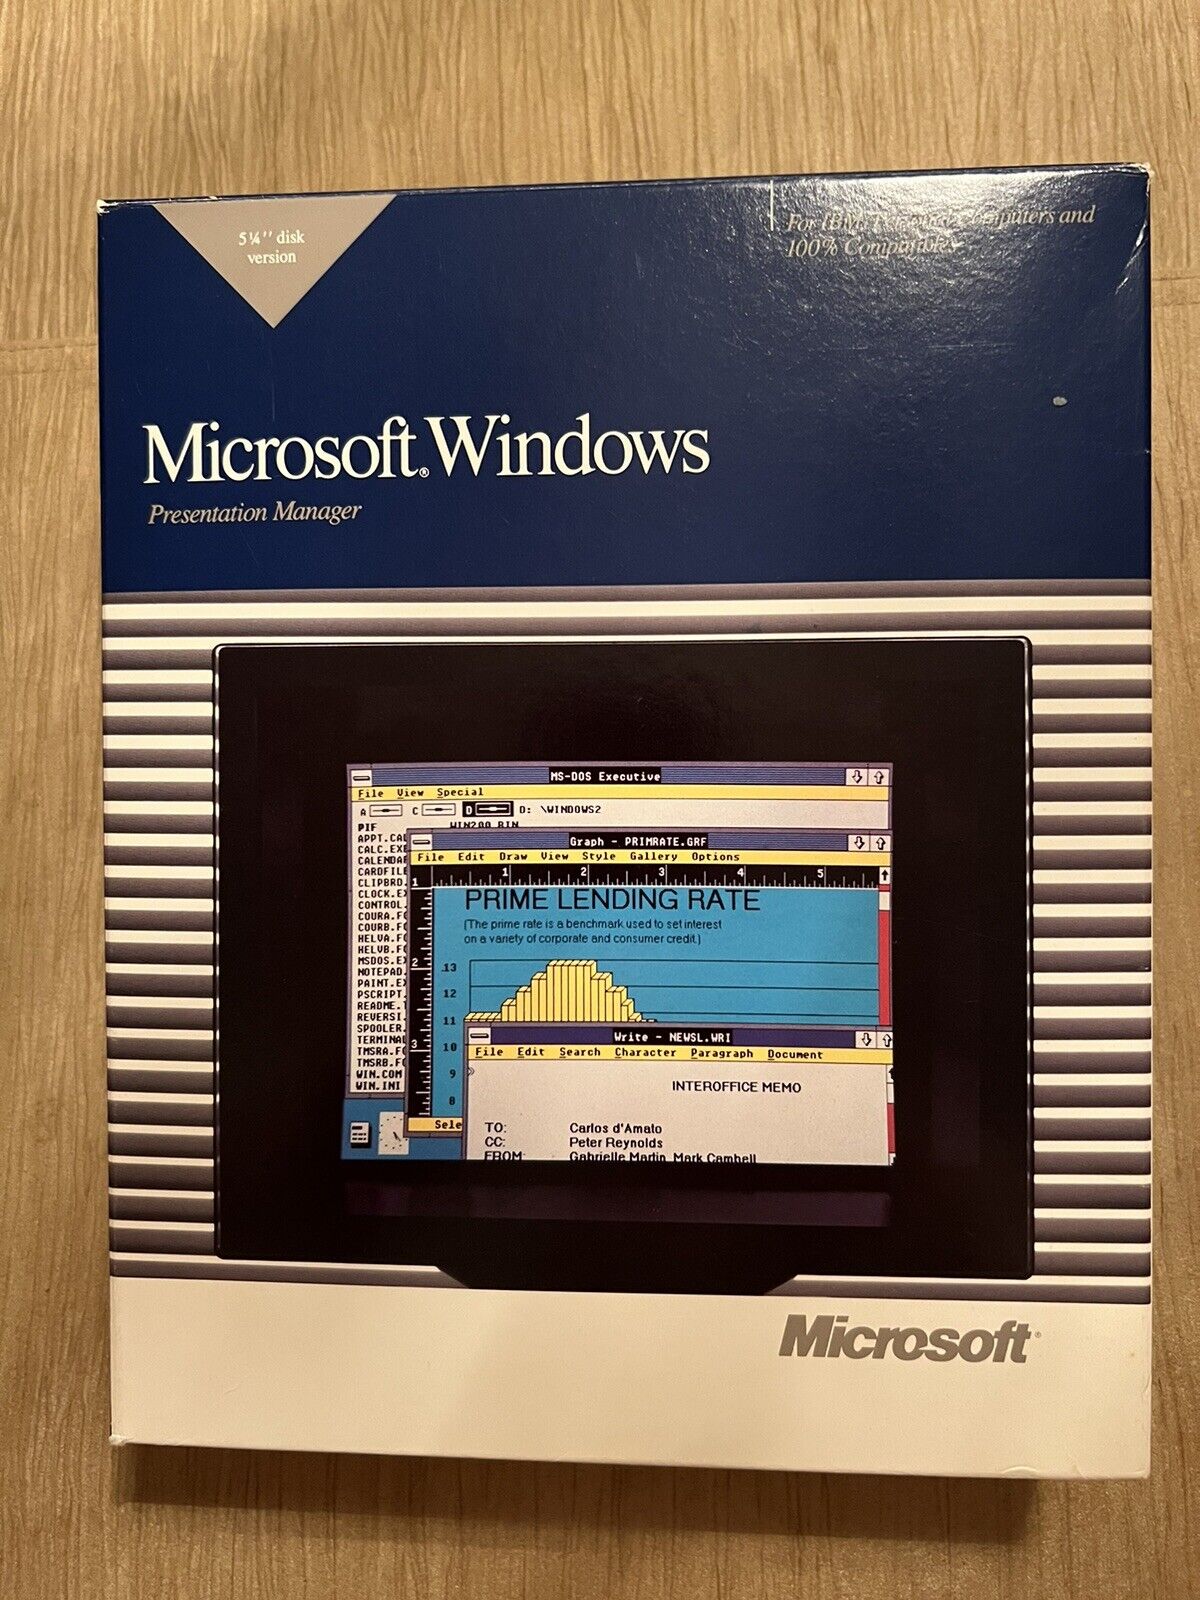 Microsoft  WINDOWS 2.0  1987 5 1/4 Disks users guide presentation manager